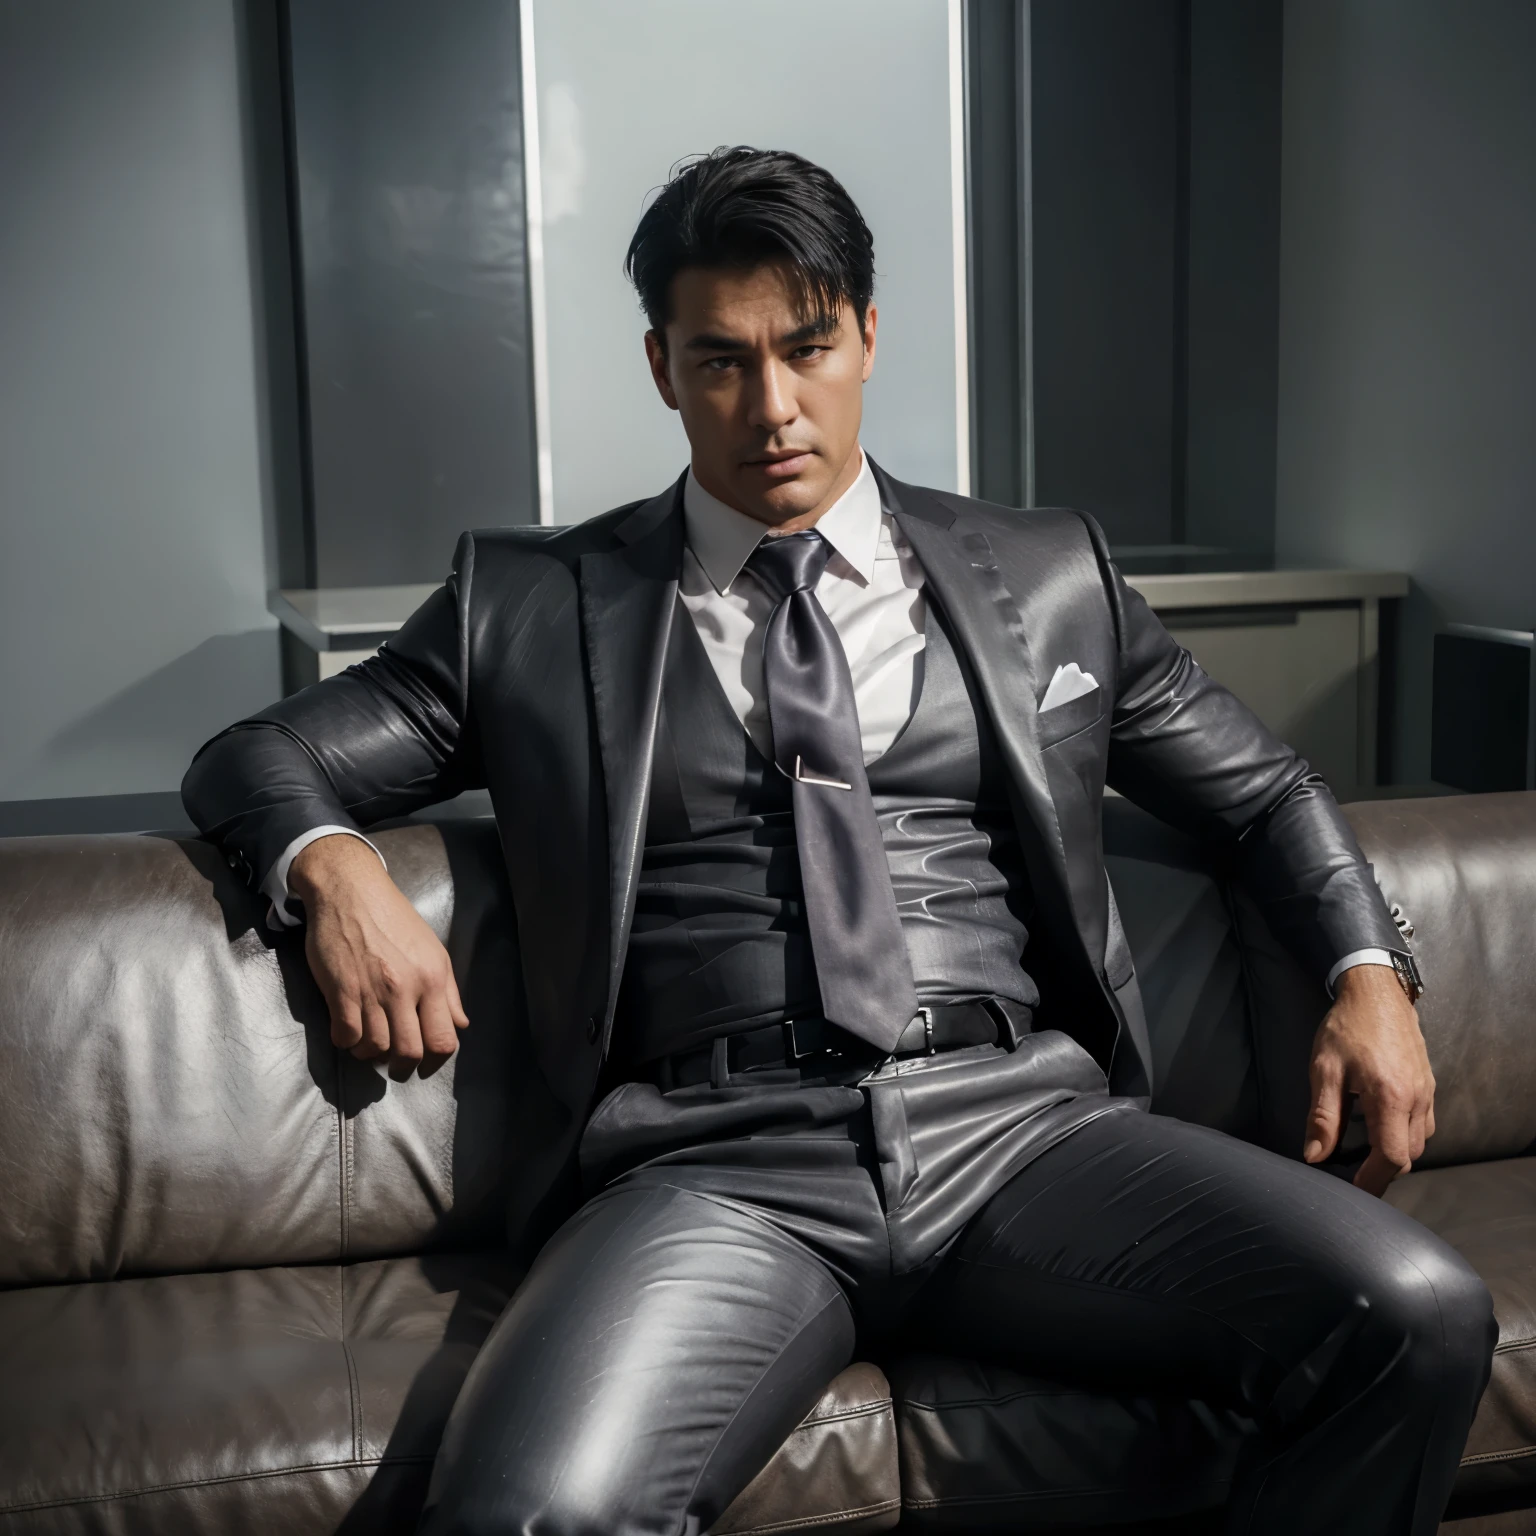 30 years old,daddy,"shiny suit",wear white shirt, super glossy pants, necktie, waistcoat, shiny satin trousers,dark gray satin fabric ,Dad sit down on the sofa,  k hd,in the office,"big muscle" ,black hair,asia face,masculine,strong man,the boss is,handsome,,leather gloves,lecherous dad,look straight ahead,dad is handsome,dad is handsome, dad is "big horny daddy"